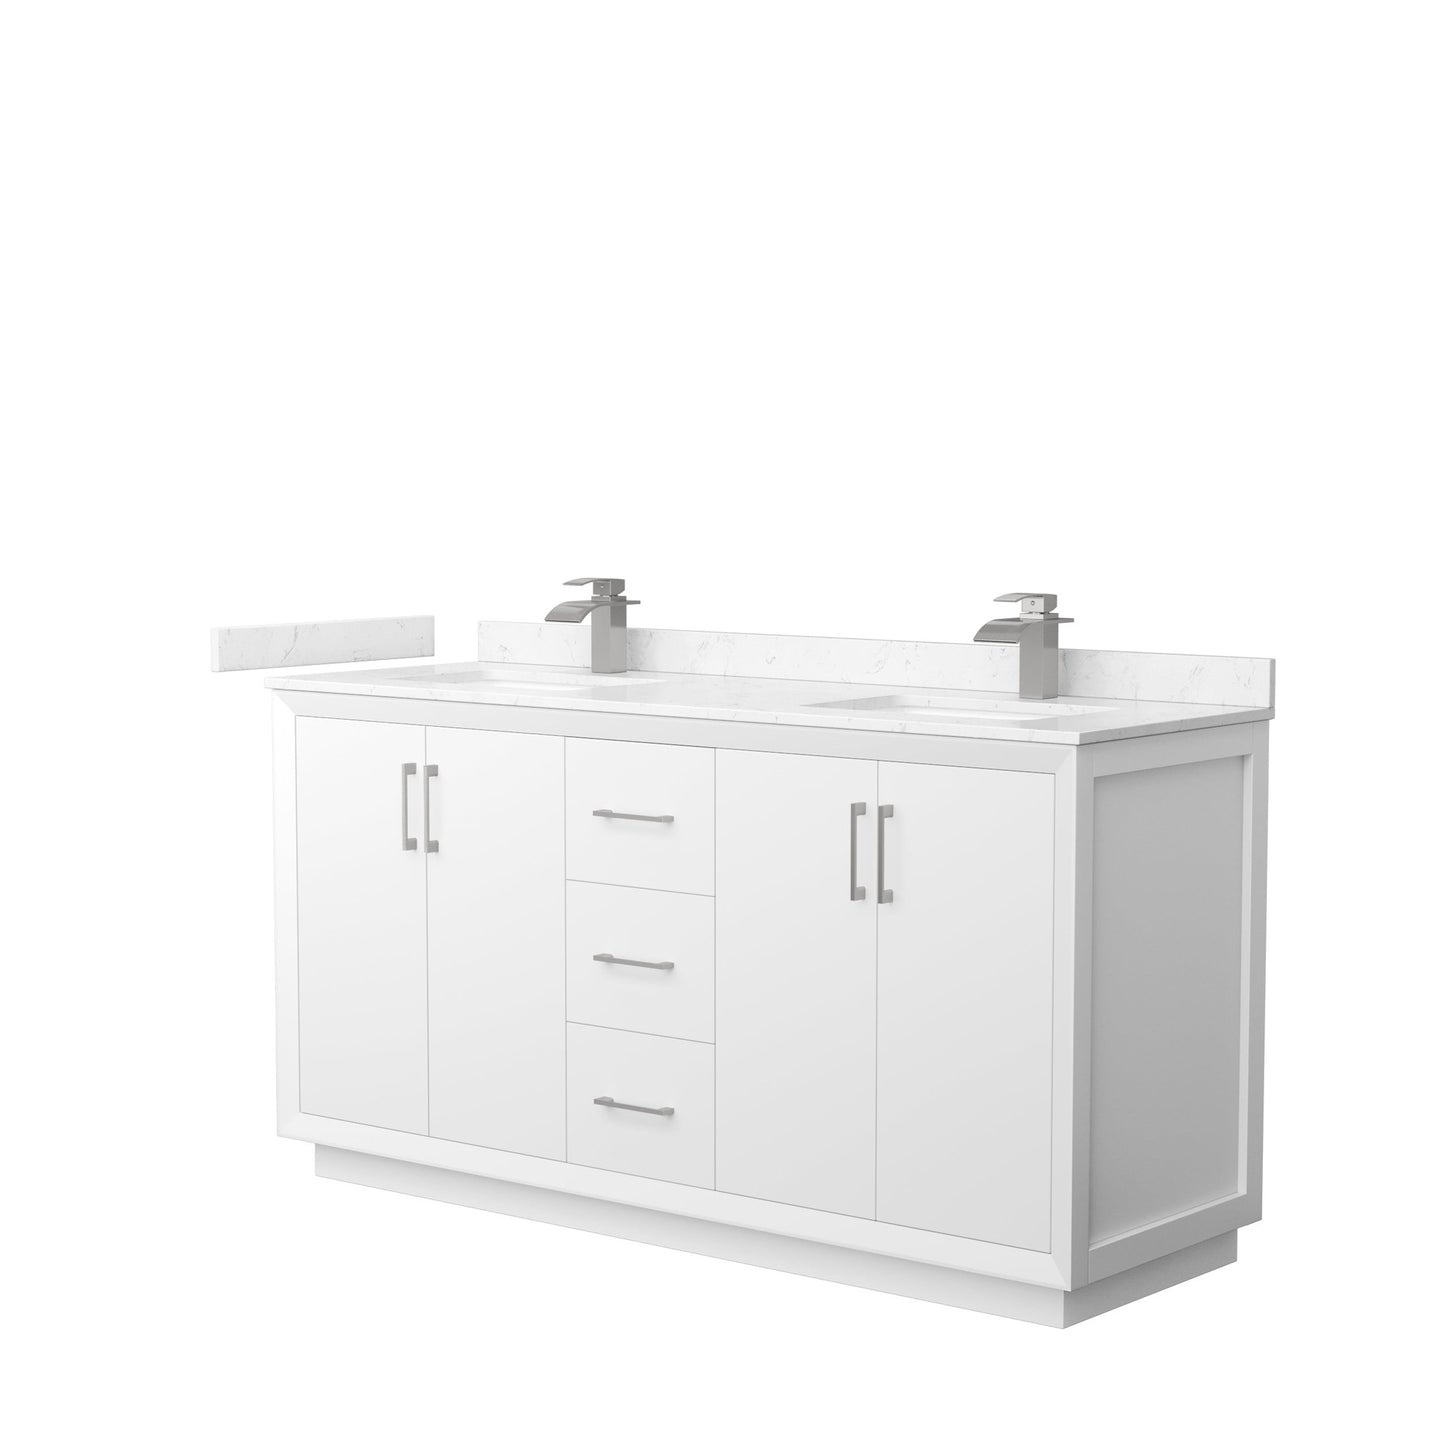 Wyndham Collection Strada 66" Double Bathroom Vanity in White, Carrara Cultured Marble Countertop, Undermount Square Sink, Brushed Nickel Trim